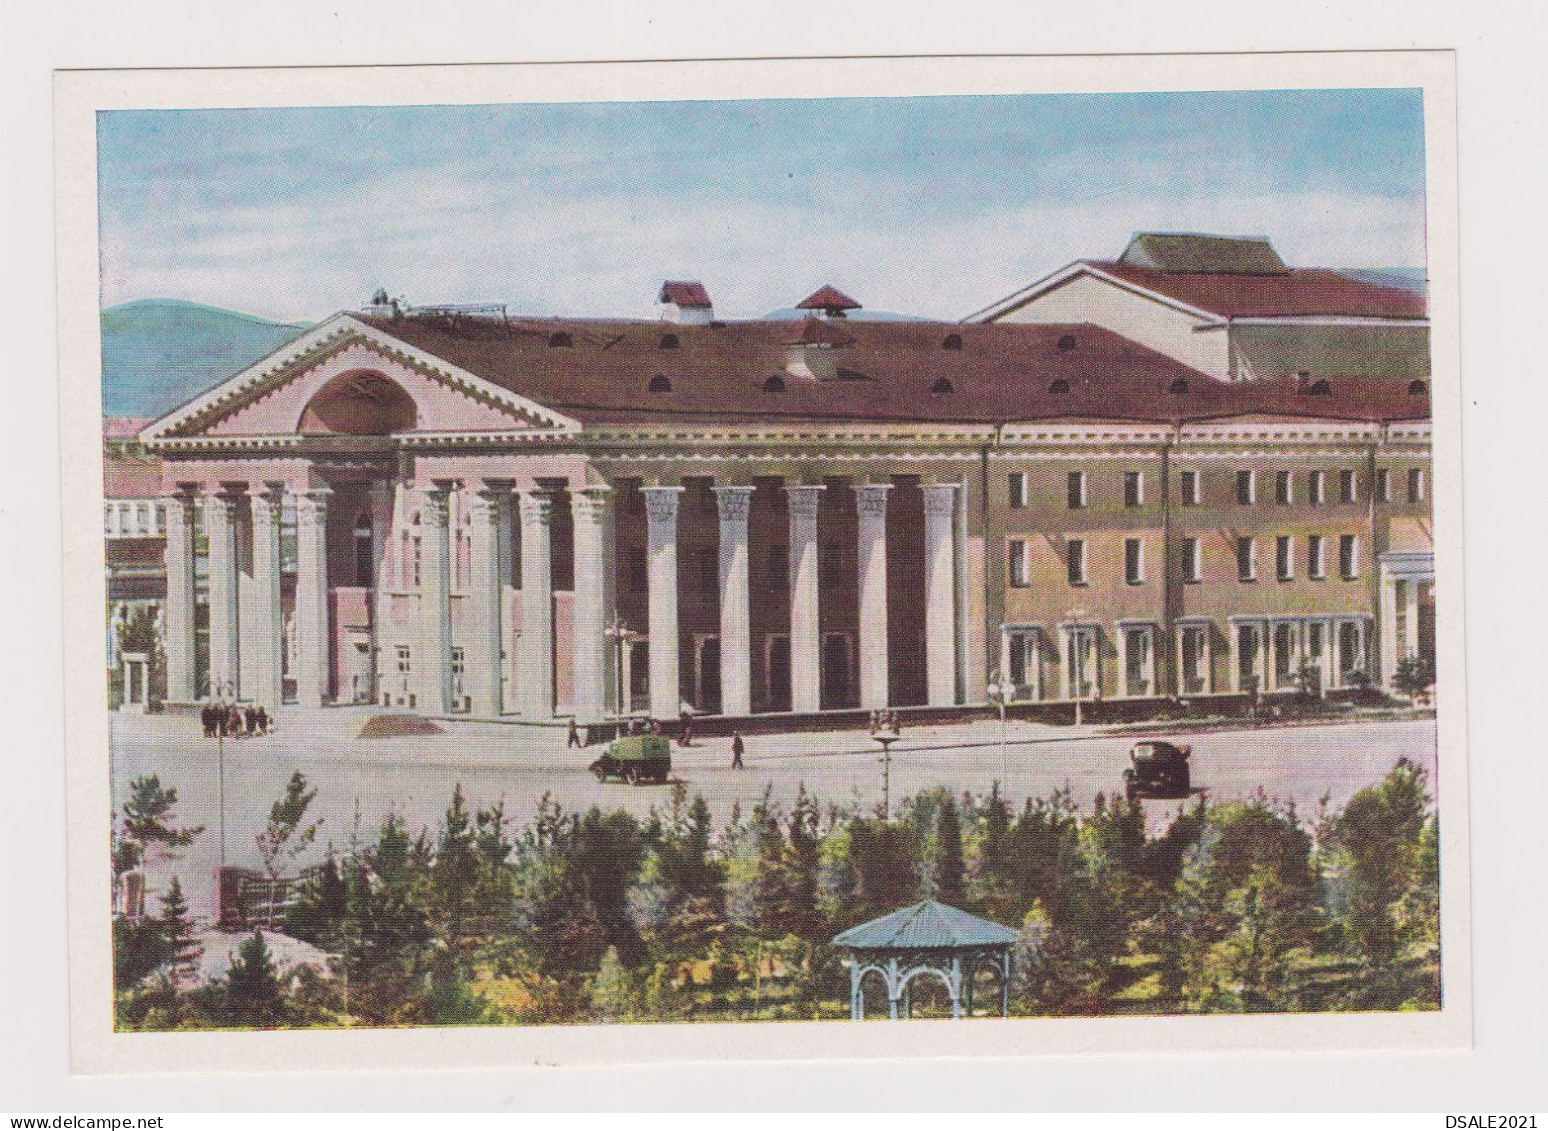 Mongolia Mongolei Mongolie Ulaanbaatar View Of State State Musical-Dramatic Theatre 1960s Soviet USSR Postcard (66637) - Mongolia